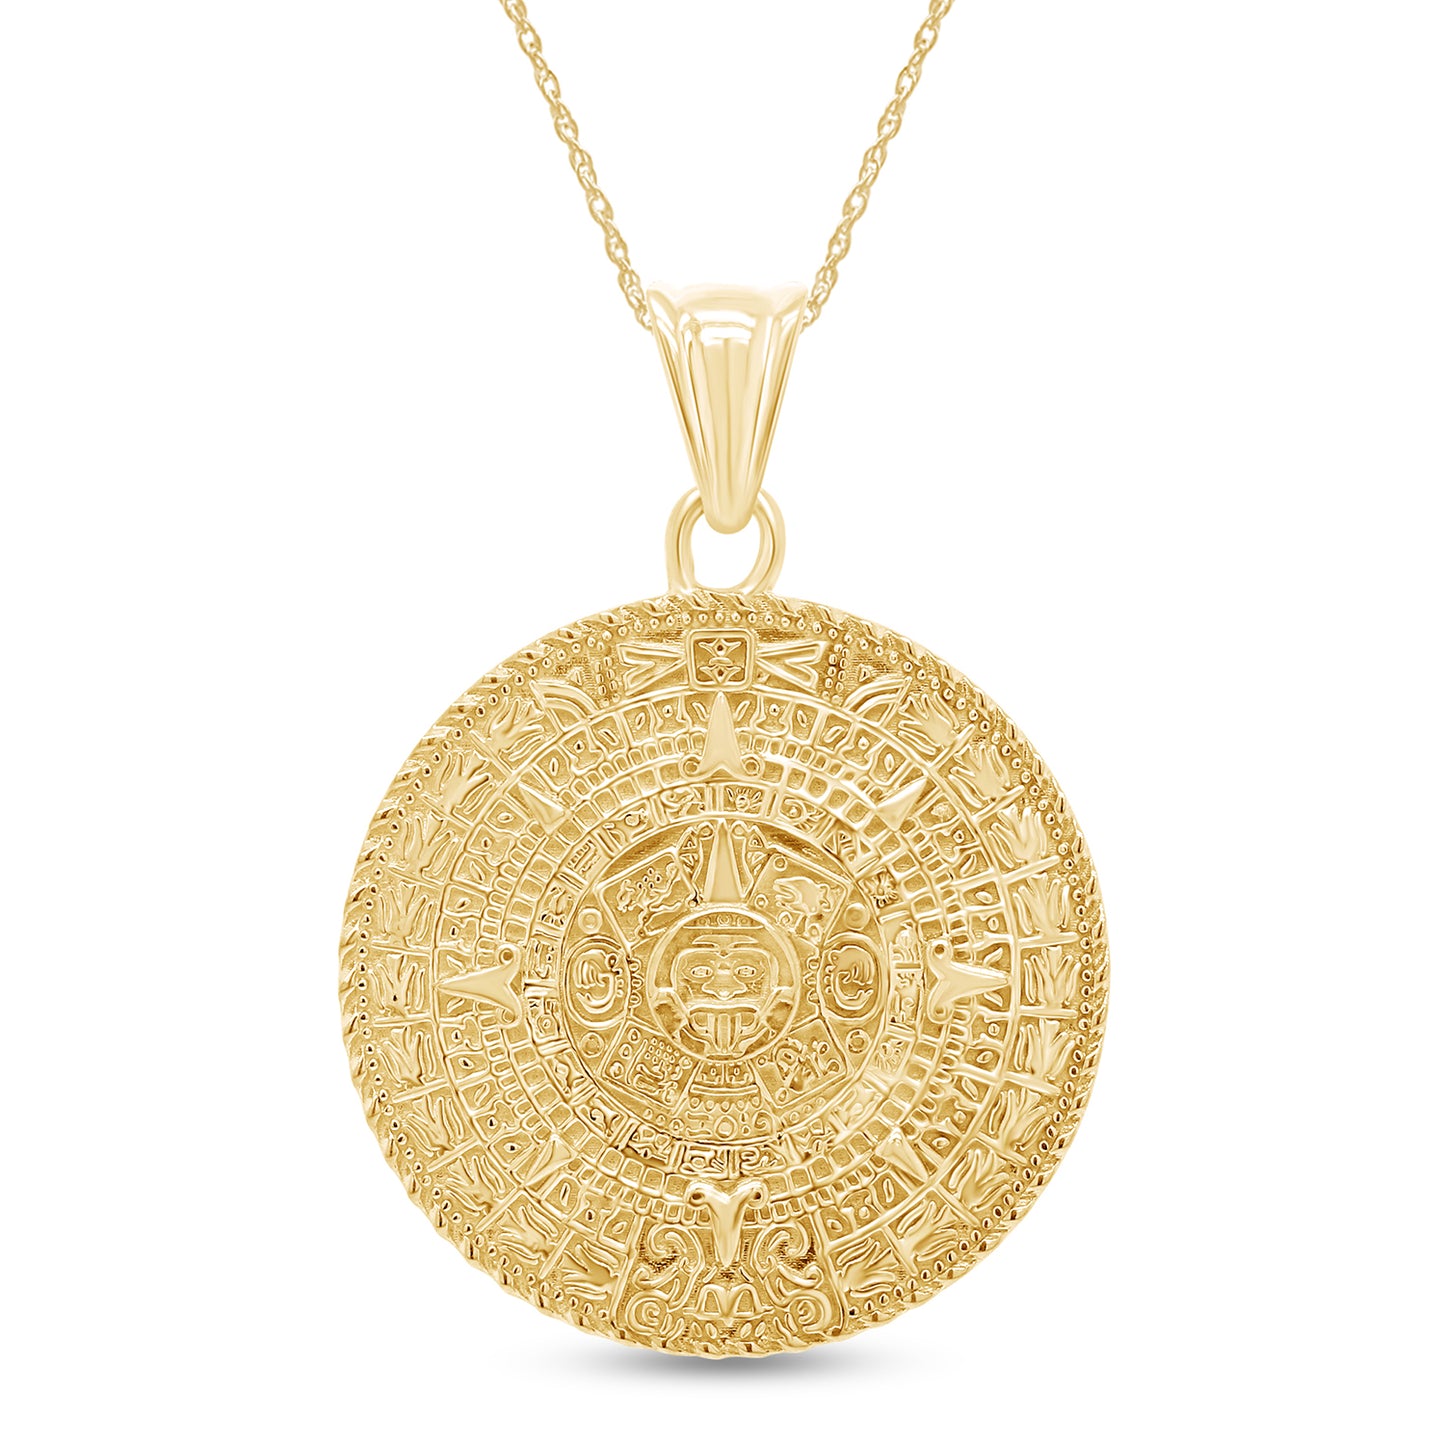 Mayan Sun Calendar Charm Pendant Necklace In 925 Sterling Silver